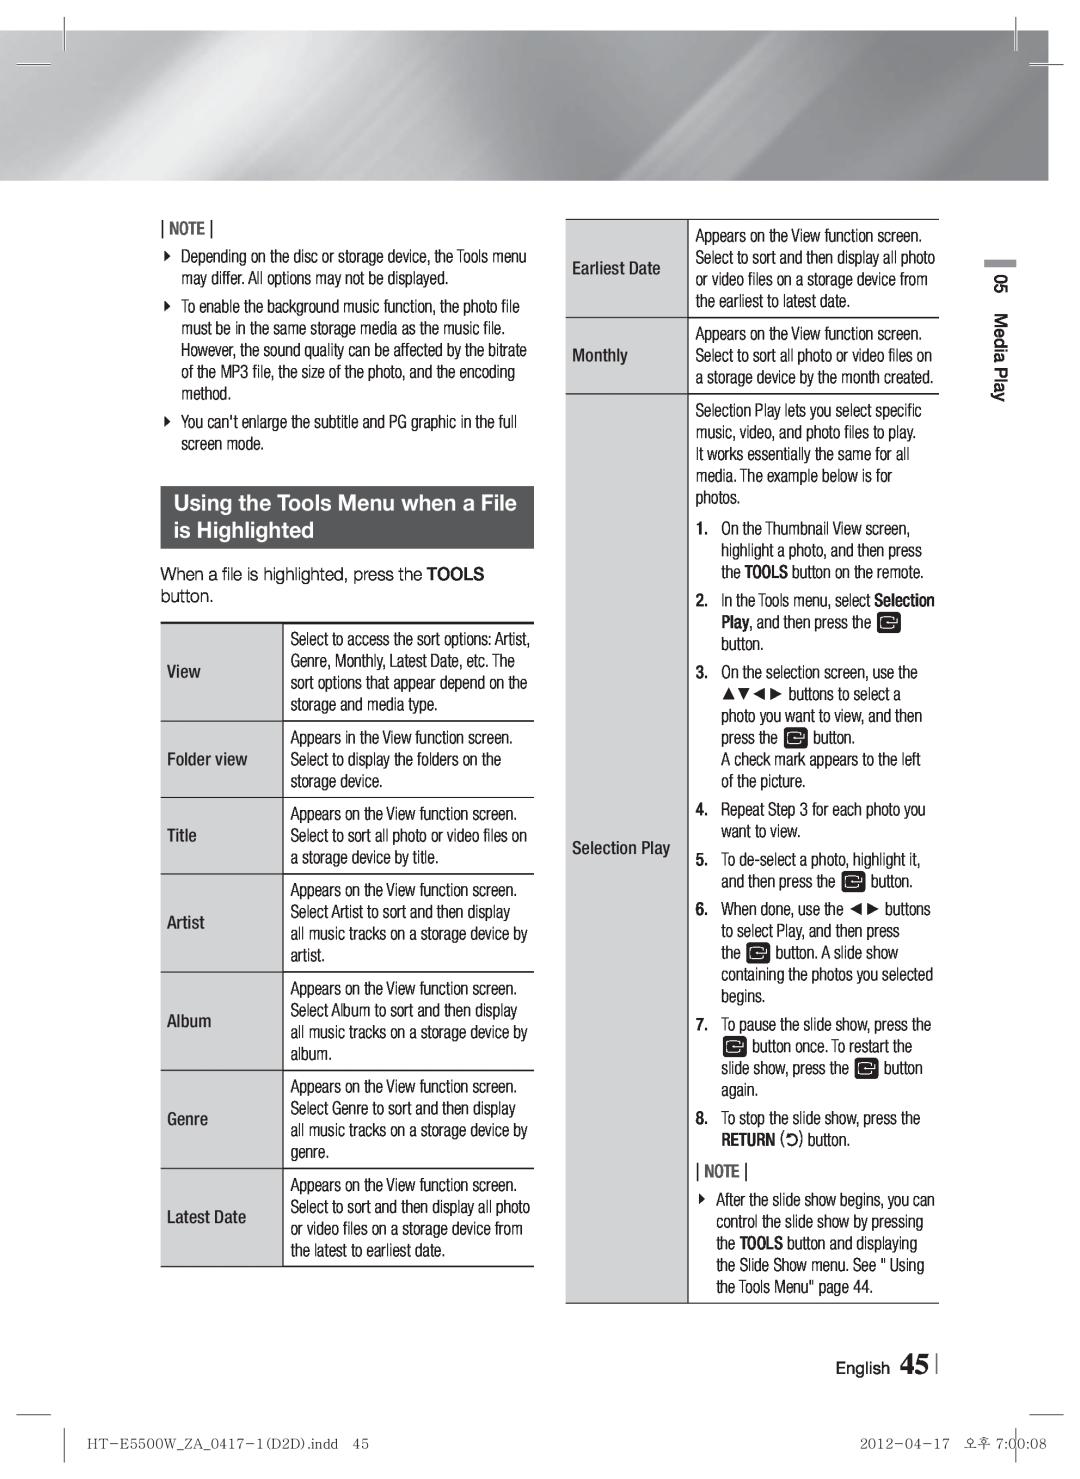 Samsung HT-E550 user manual Using the Tools Menu when a File is Highlighted, Note 